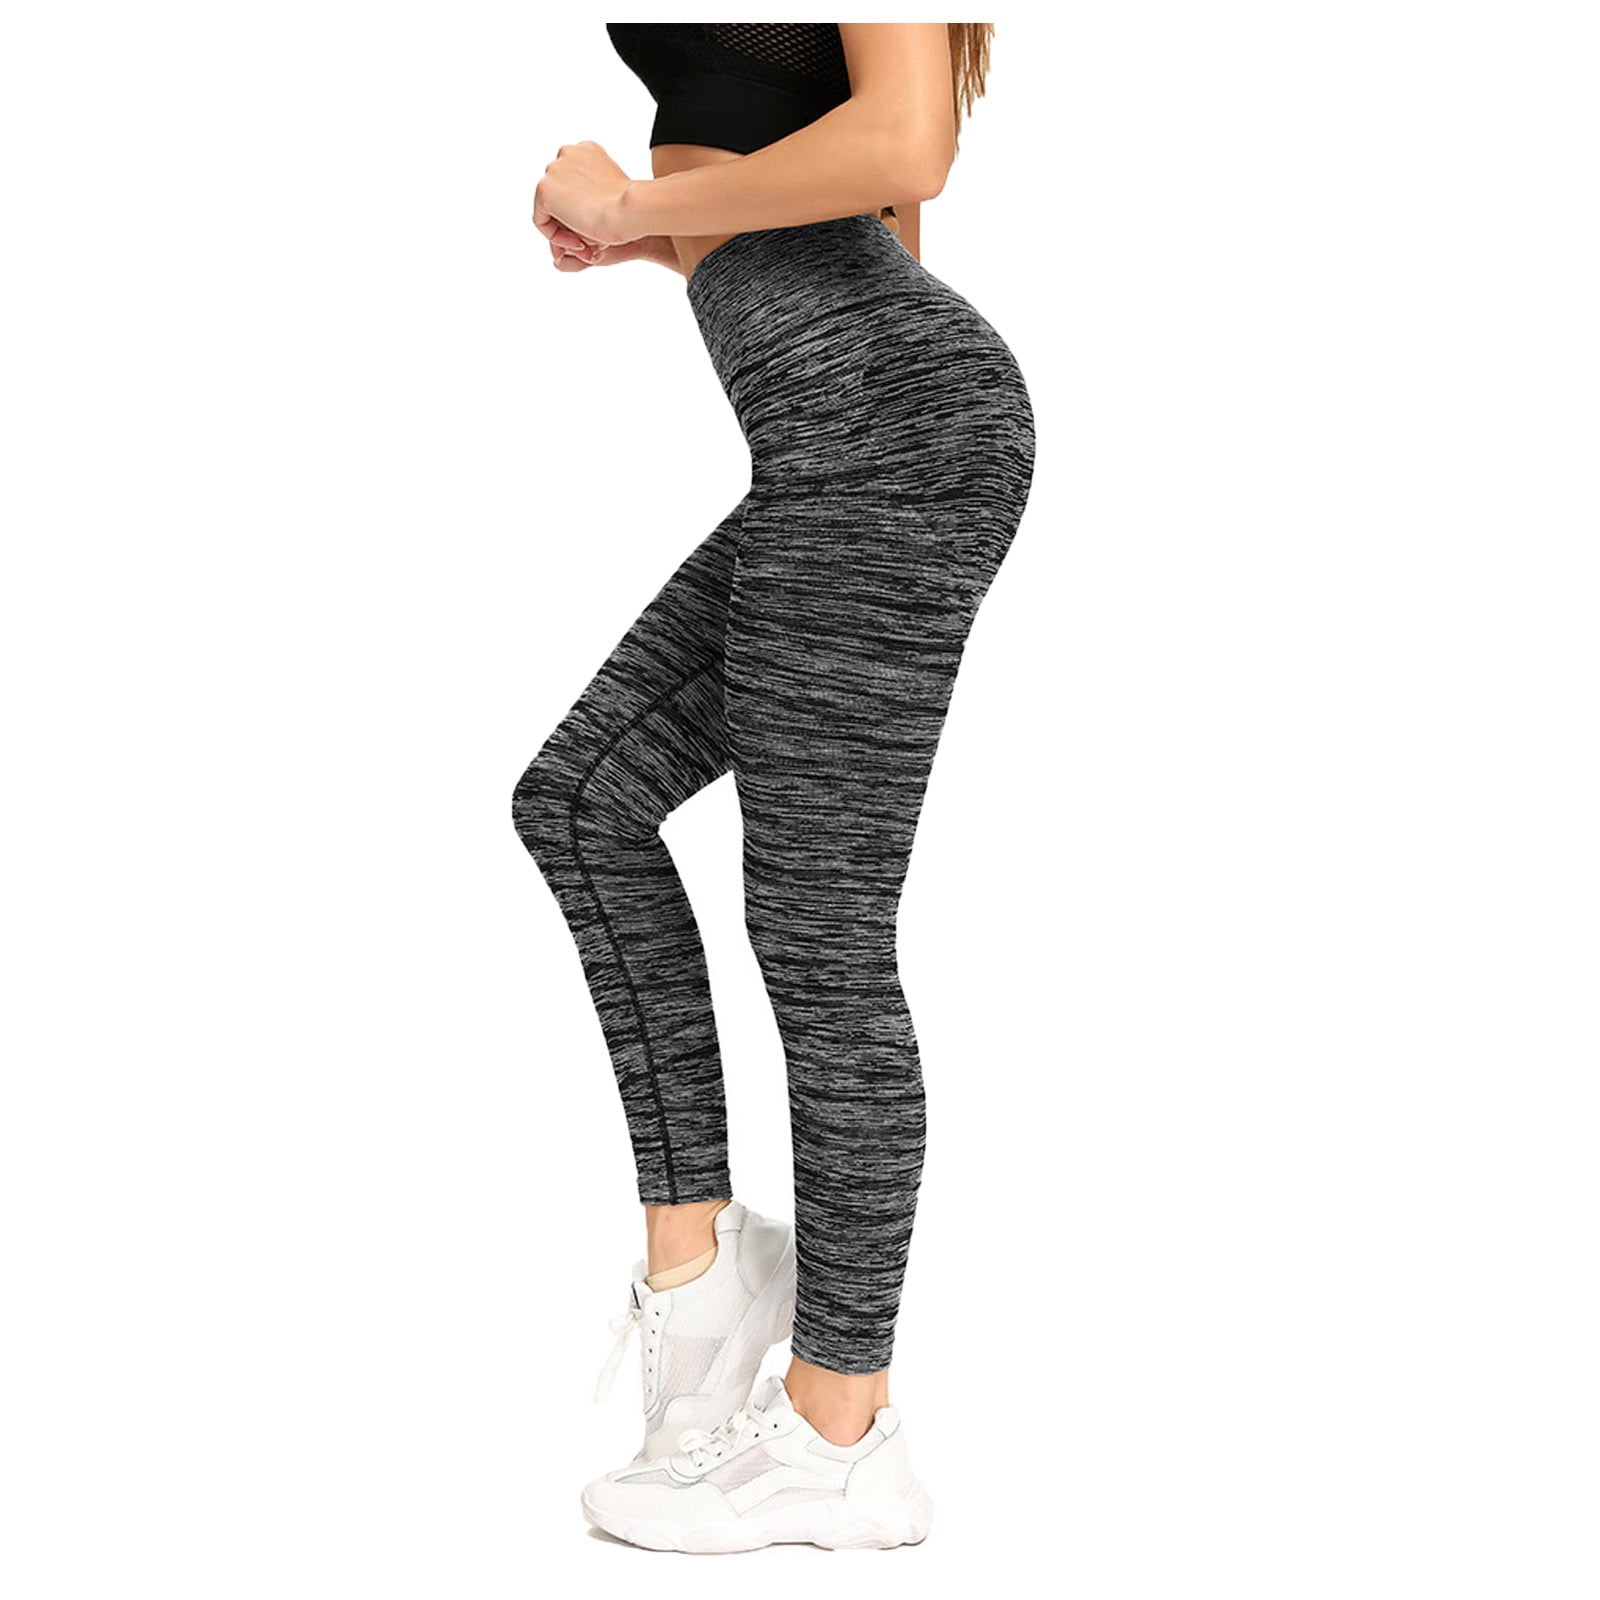 HAPIMO Sales Women's Seamless Yoga Pants High Waist Tummy Control Workout  Pants Hip Lift Tights Stretch Athletic Slimming Running Yoga Leggings for